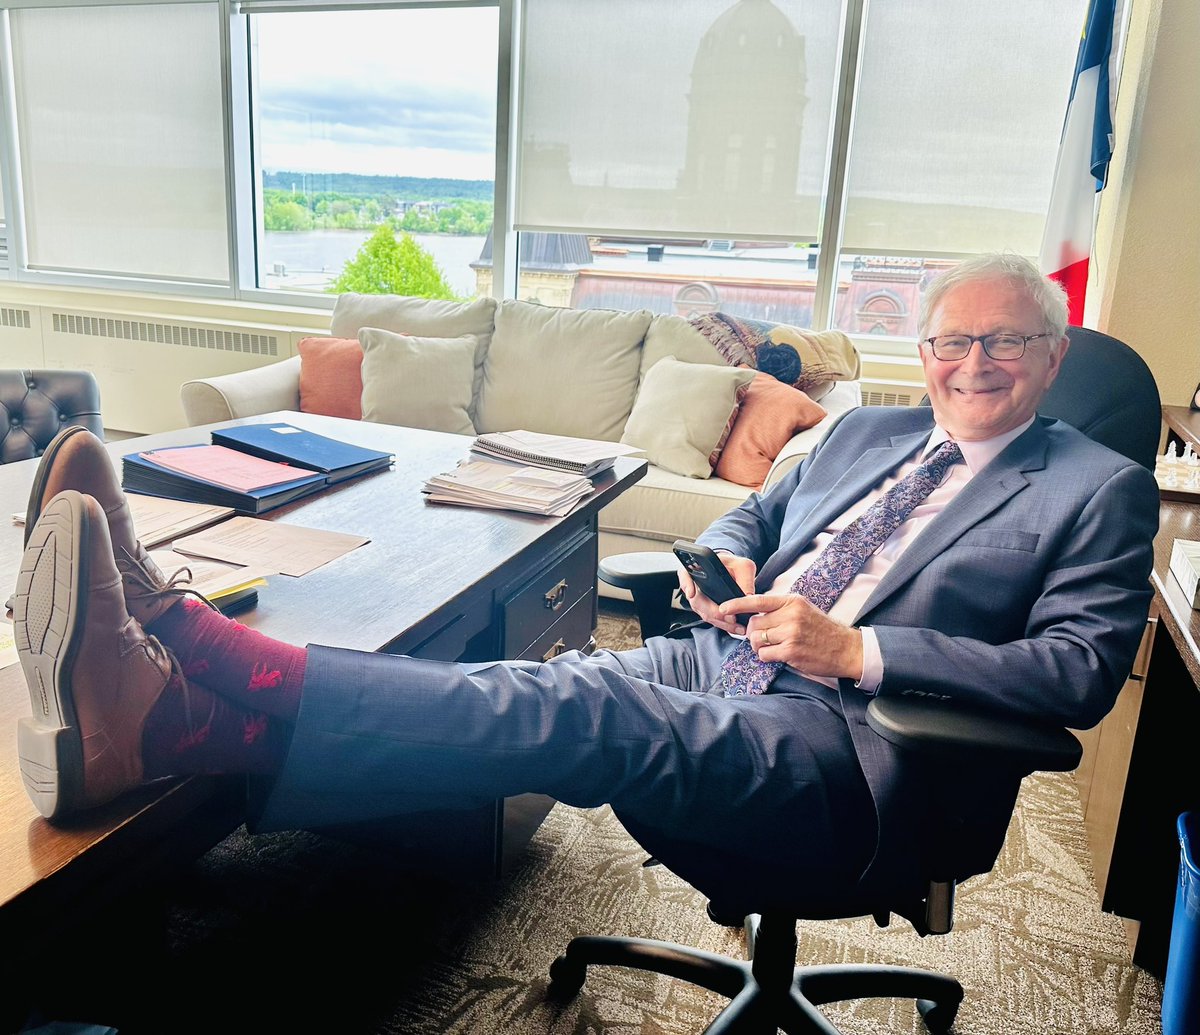 I want to thank @AbilityNB and their executive director @HaleyFlaro for these beautiful socks celebrating Disability Awareness Week! Now we can proudly #RockTheSocks in style to raise awareness for disabilities in New Brunswick. The theme this year is “Embracing Accessibility,